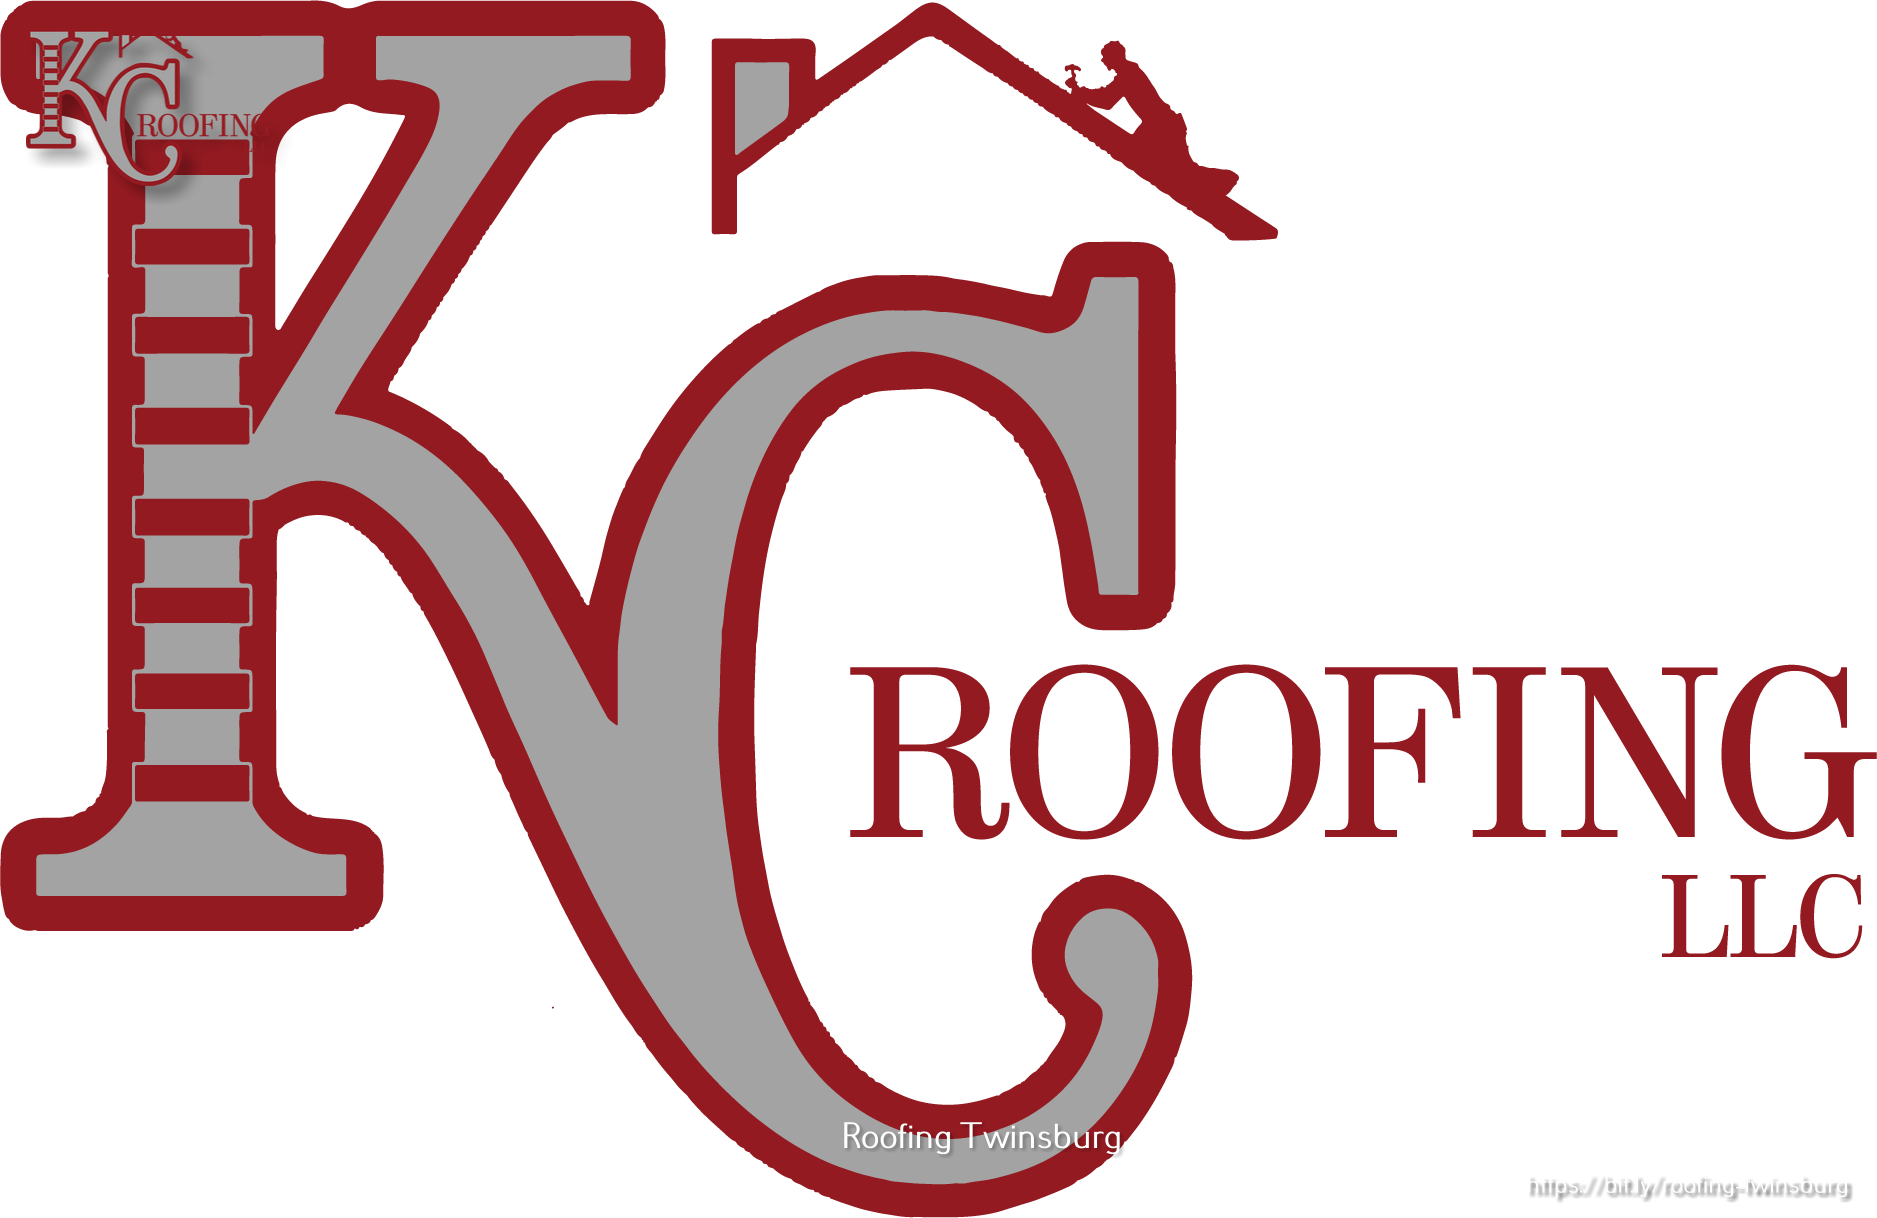 KC Roofing, LLC Explains Why Locals Should Hire a Professional Roofing Company